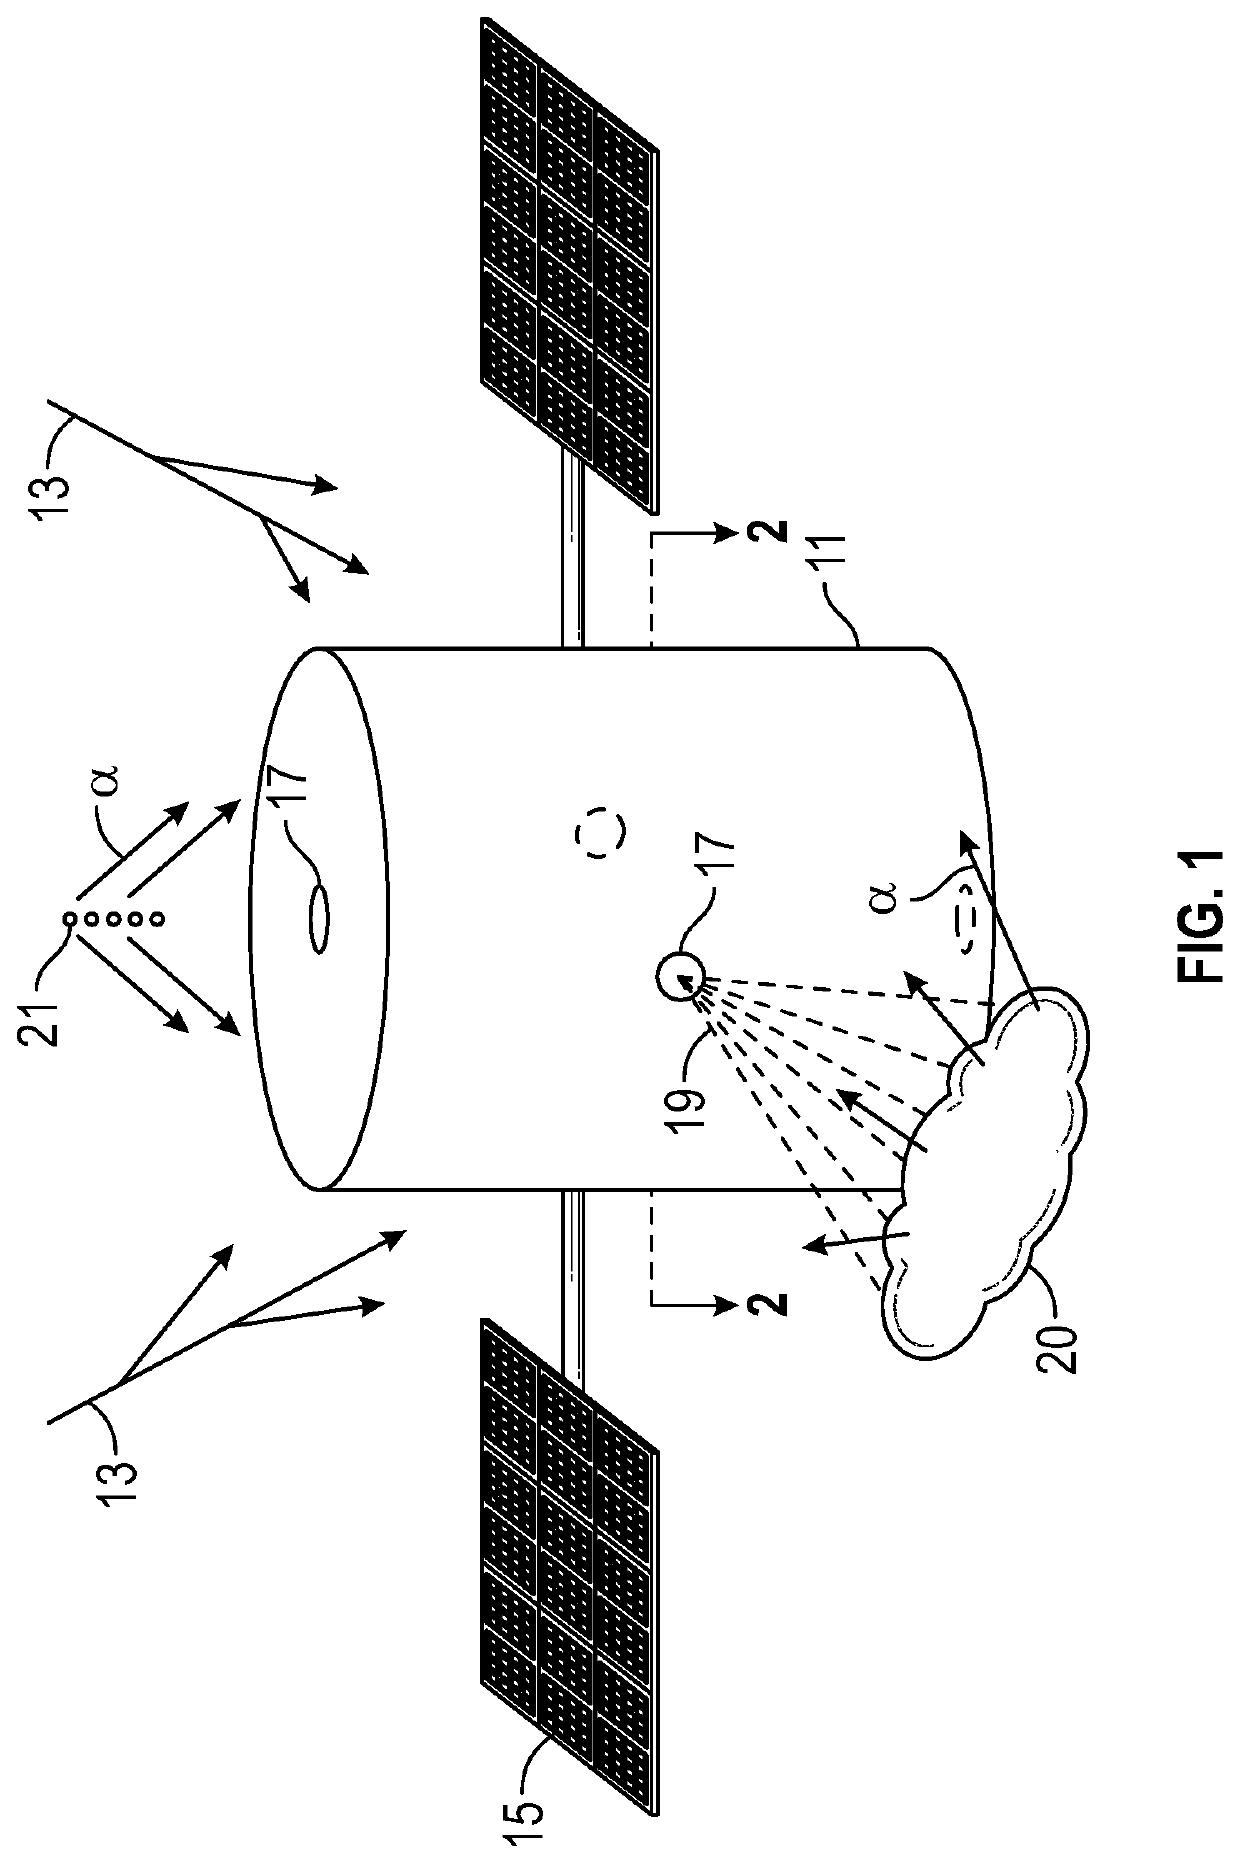 Spacecraft collision-avoidance propulsion system and method